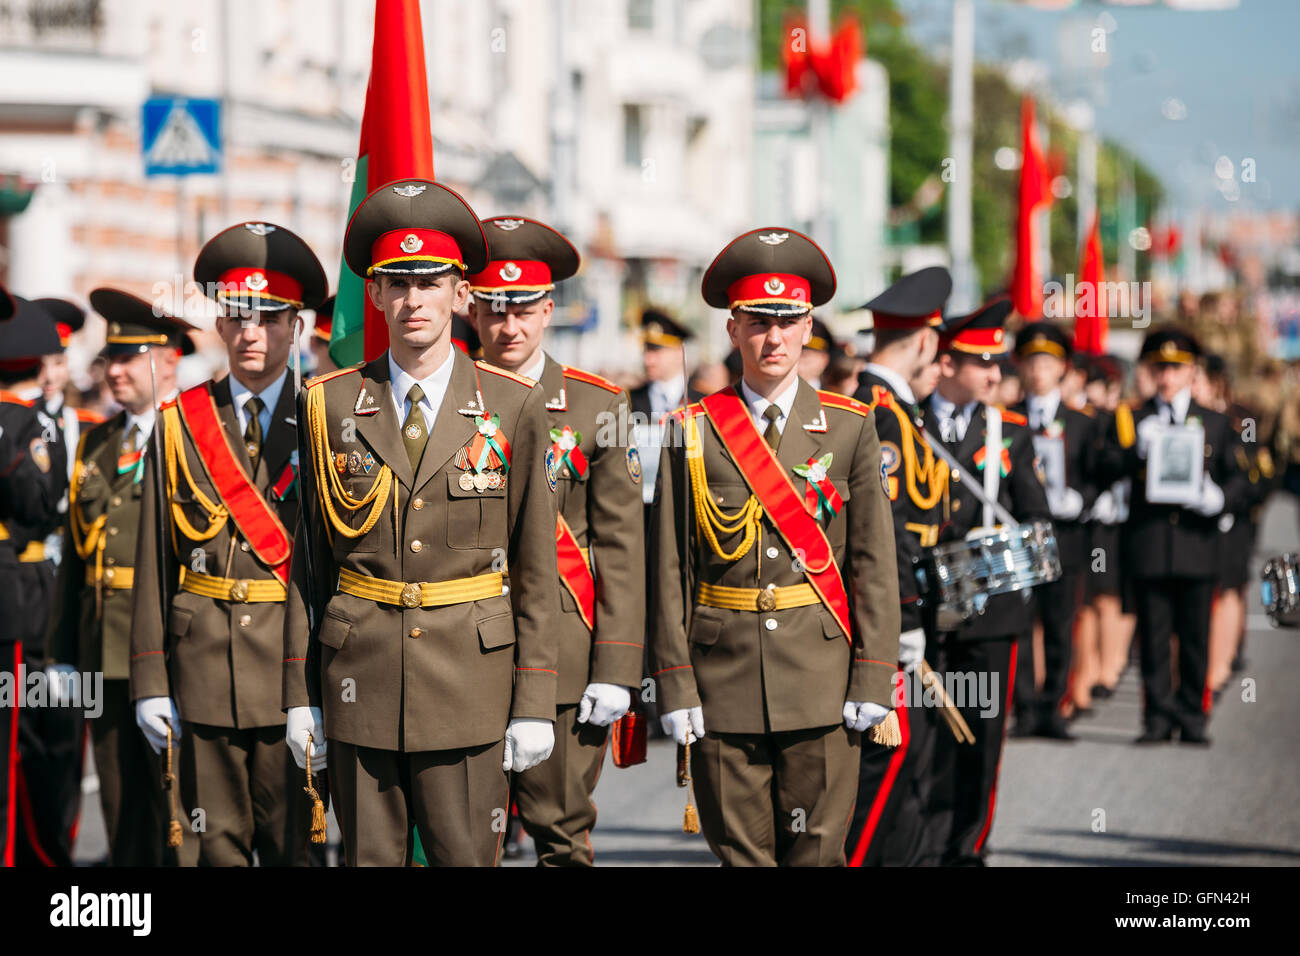 Gala Formation Of Officers  Of Armed Forces Of The Republic of Belarus, Nowaday Belarusian Army With National Flag. The Parade O Stock Photo